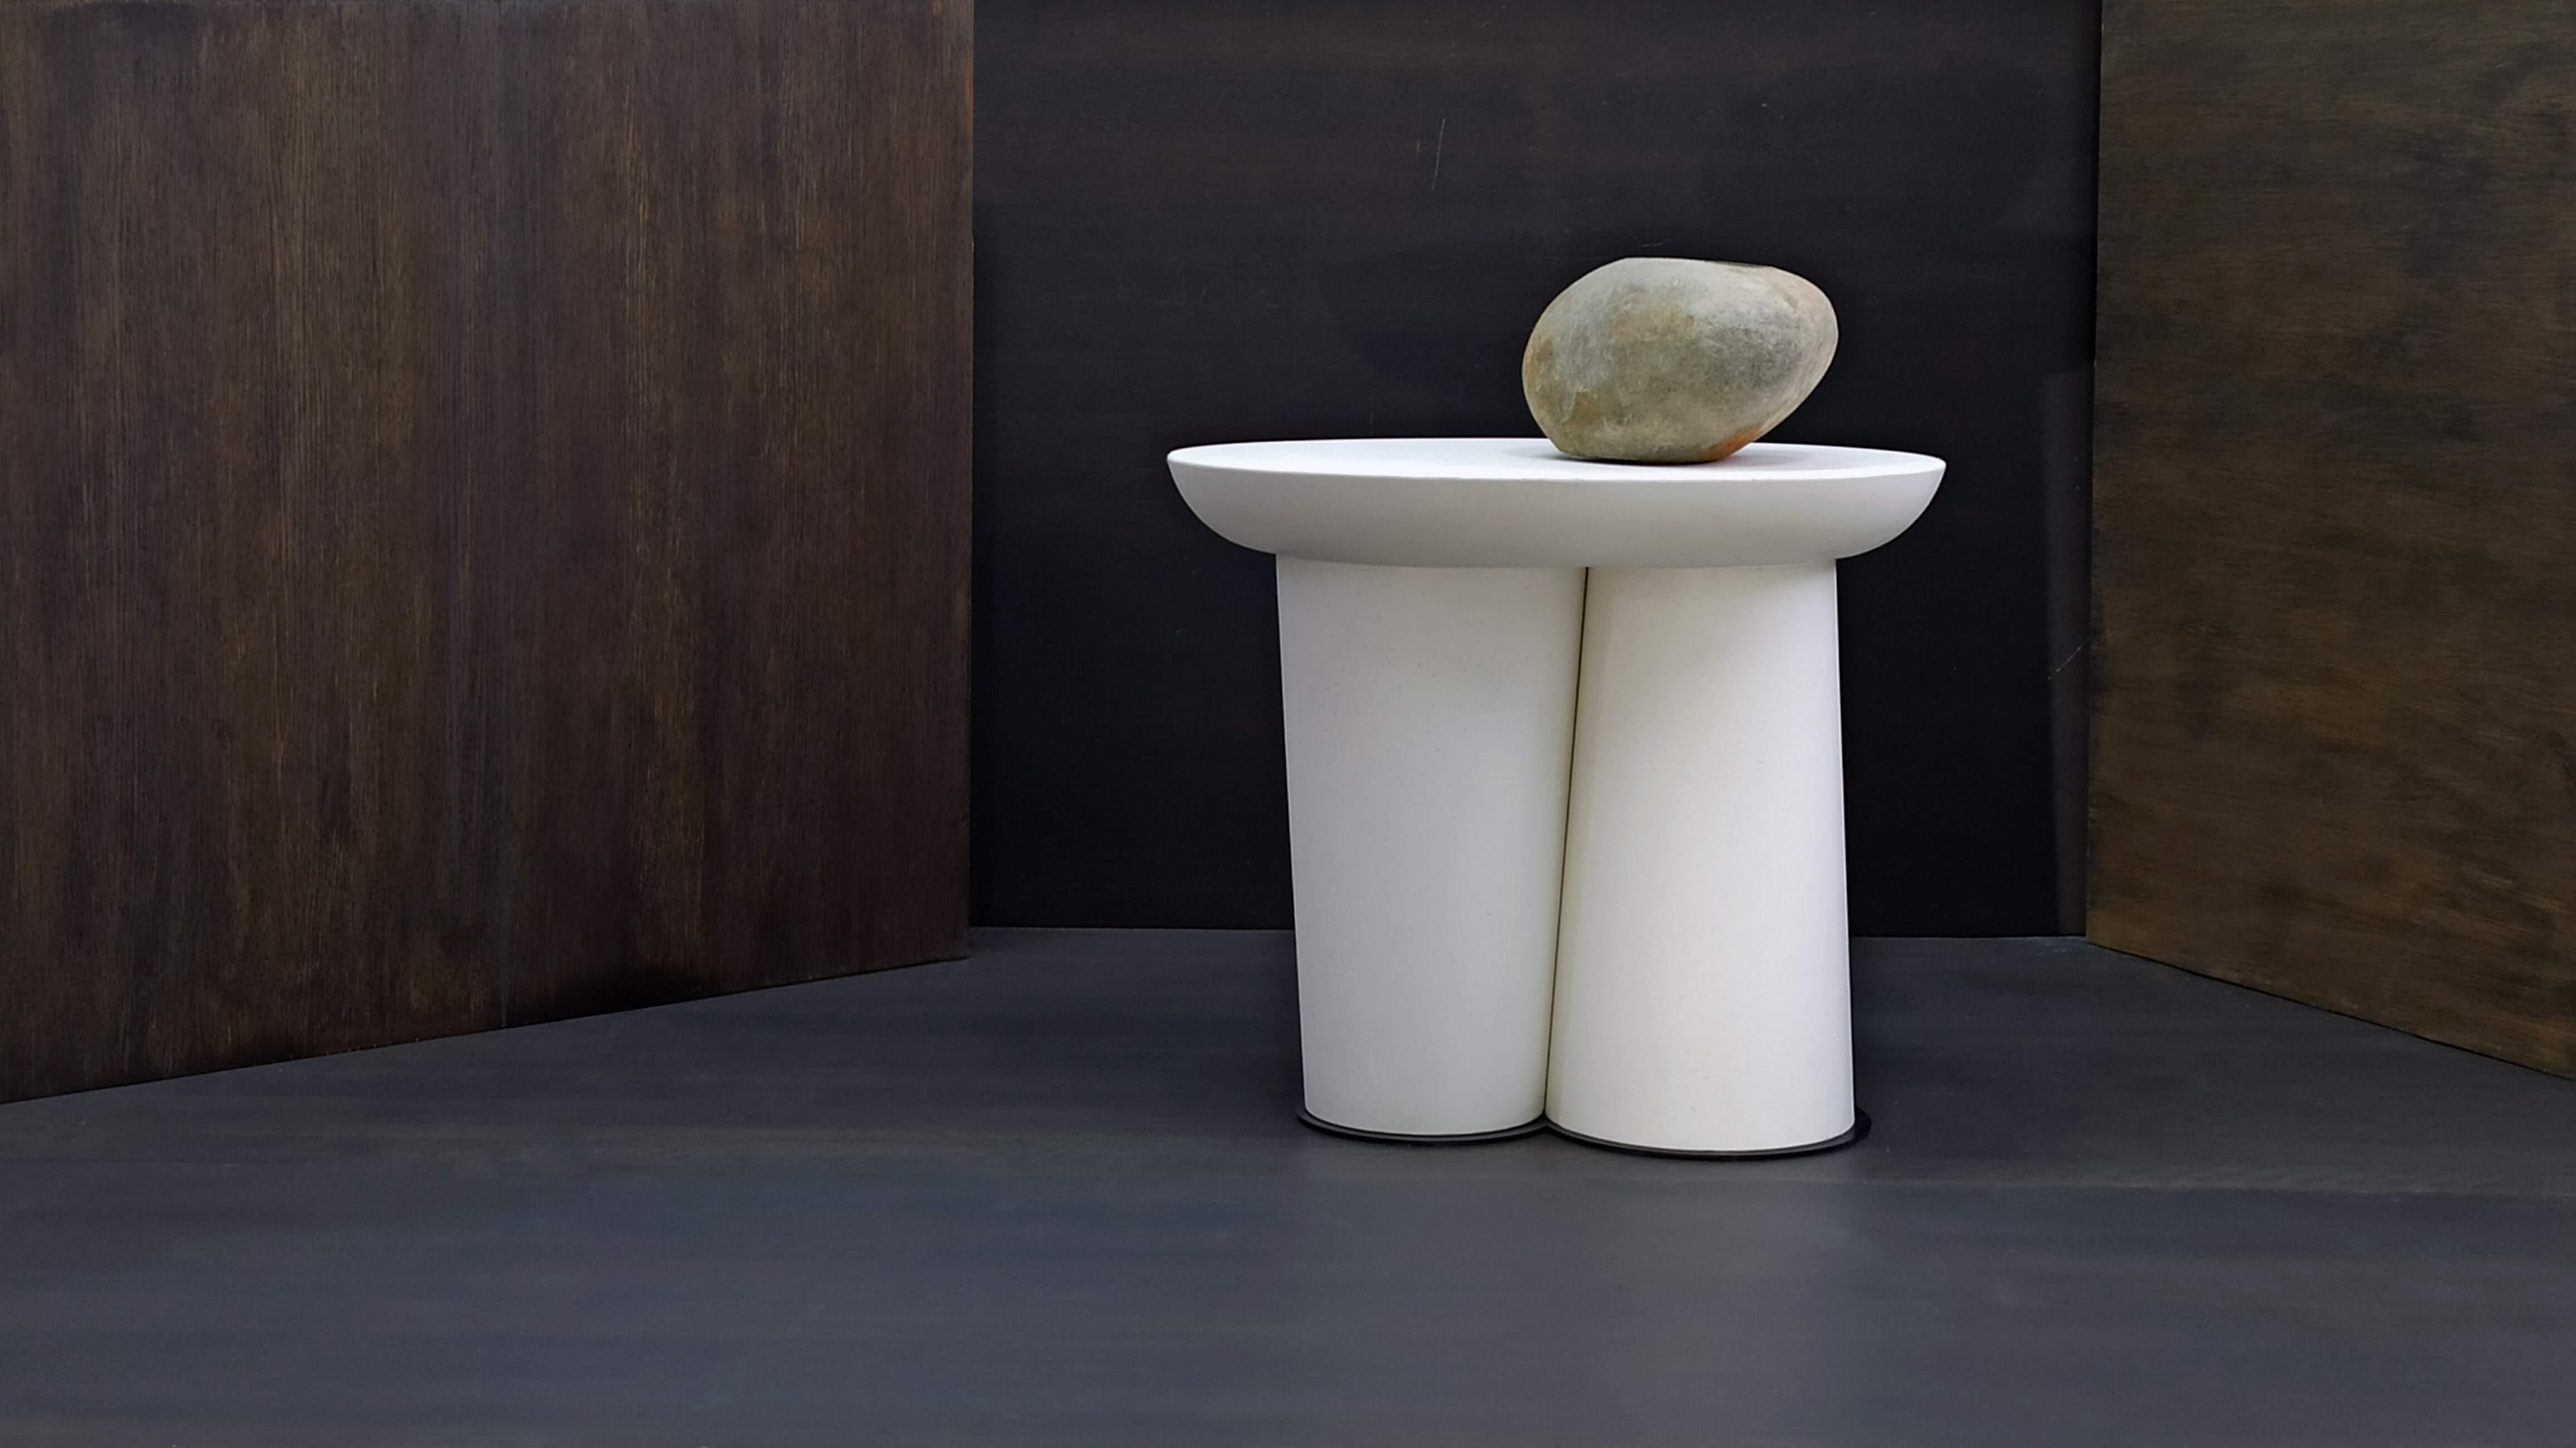 The FEMME table is part of our mono-material object collection. A piece of furniture with a distinct presence, a serene sensuality and a sense of playfulness.

COLOUR
Body: white smooth surface with very refined matte varnish.
Top: white with white